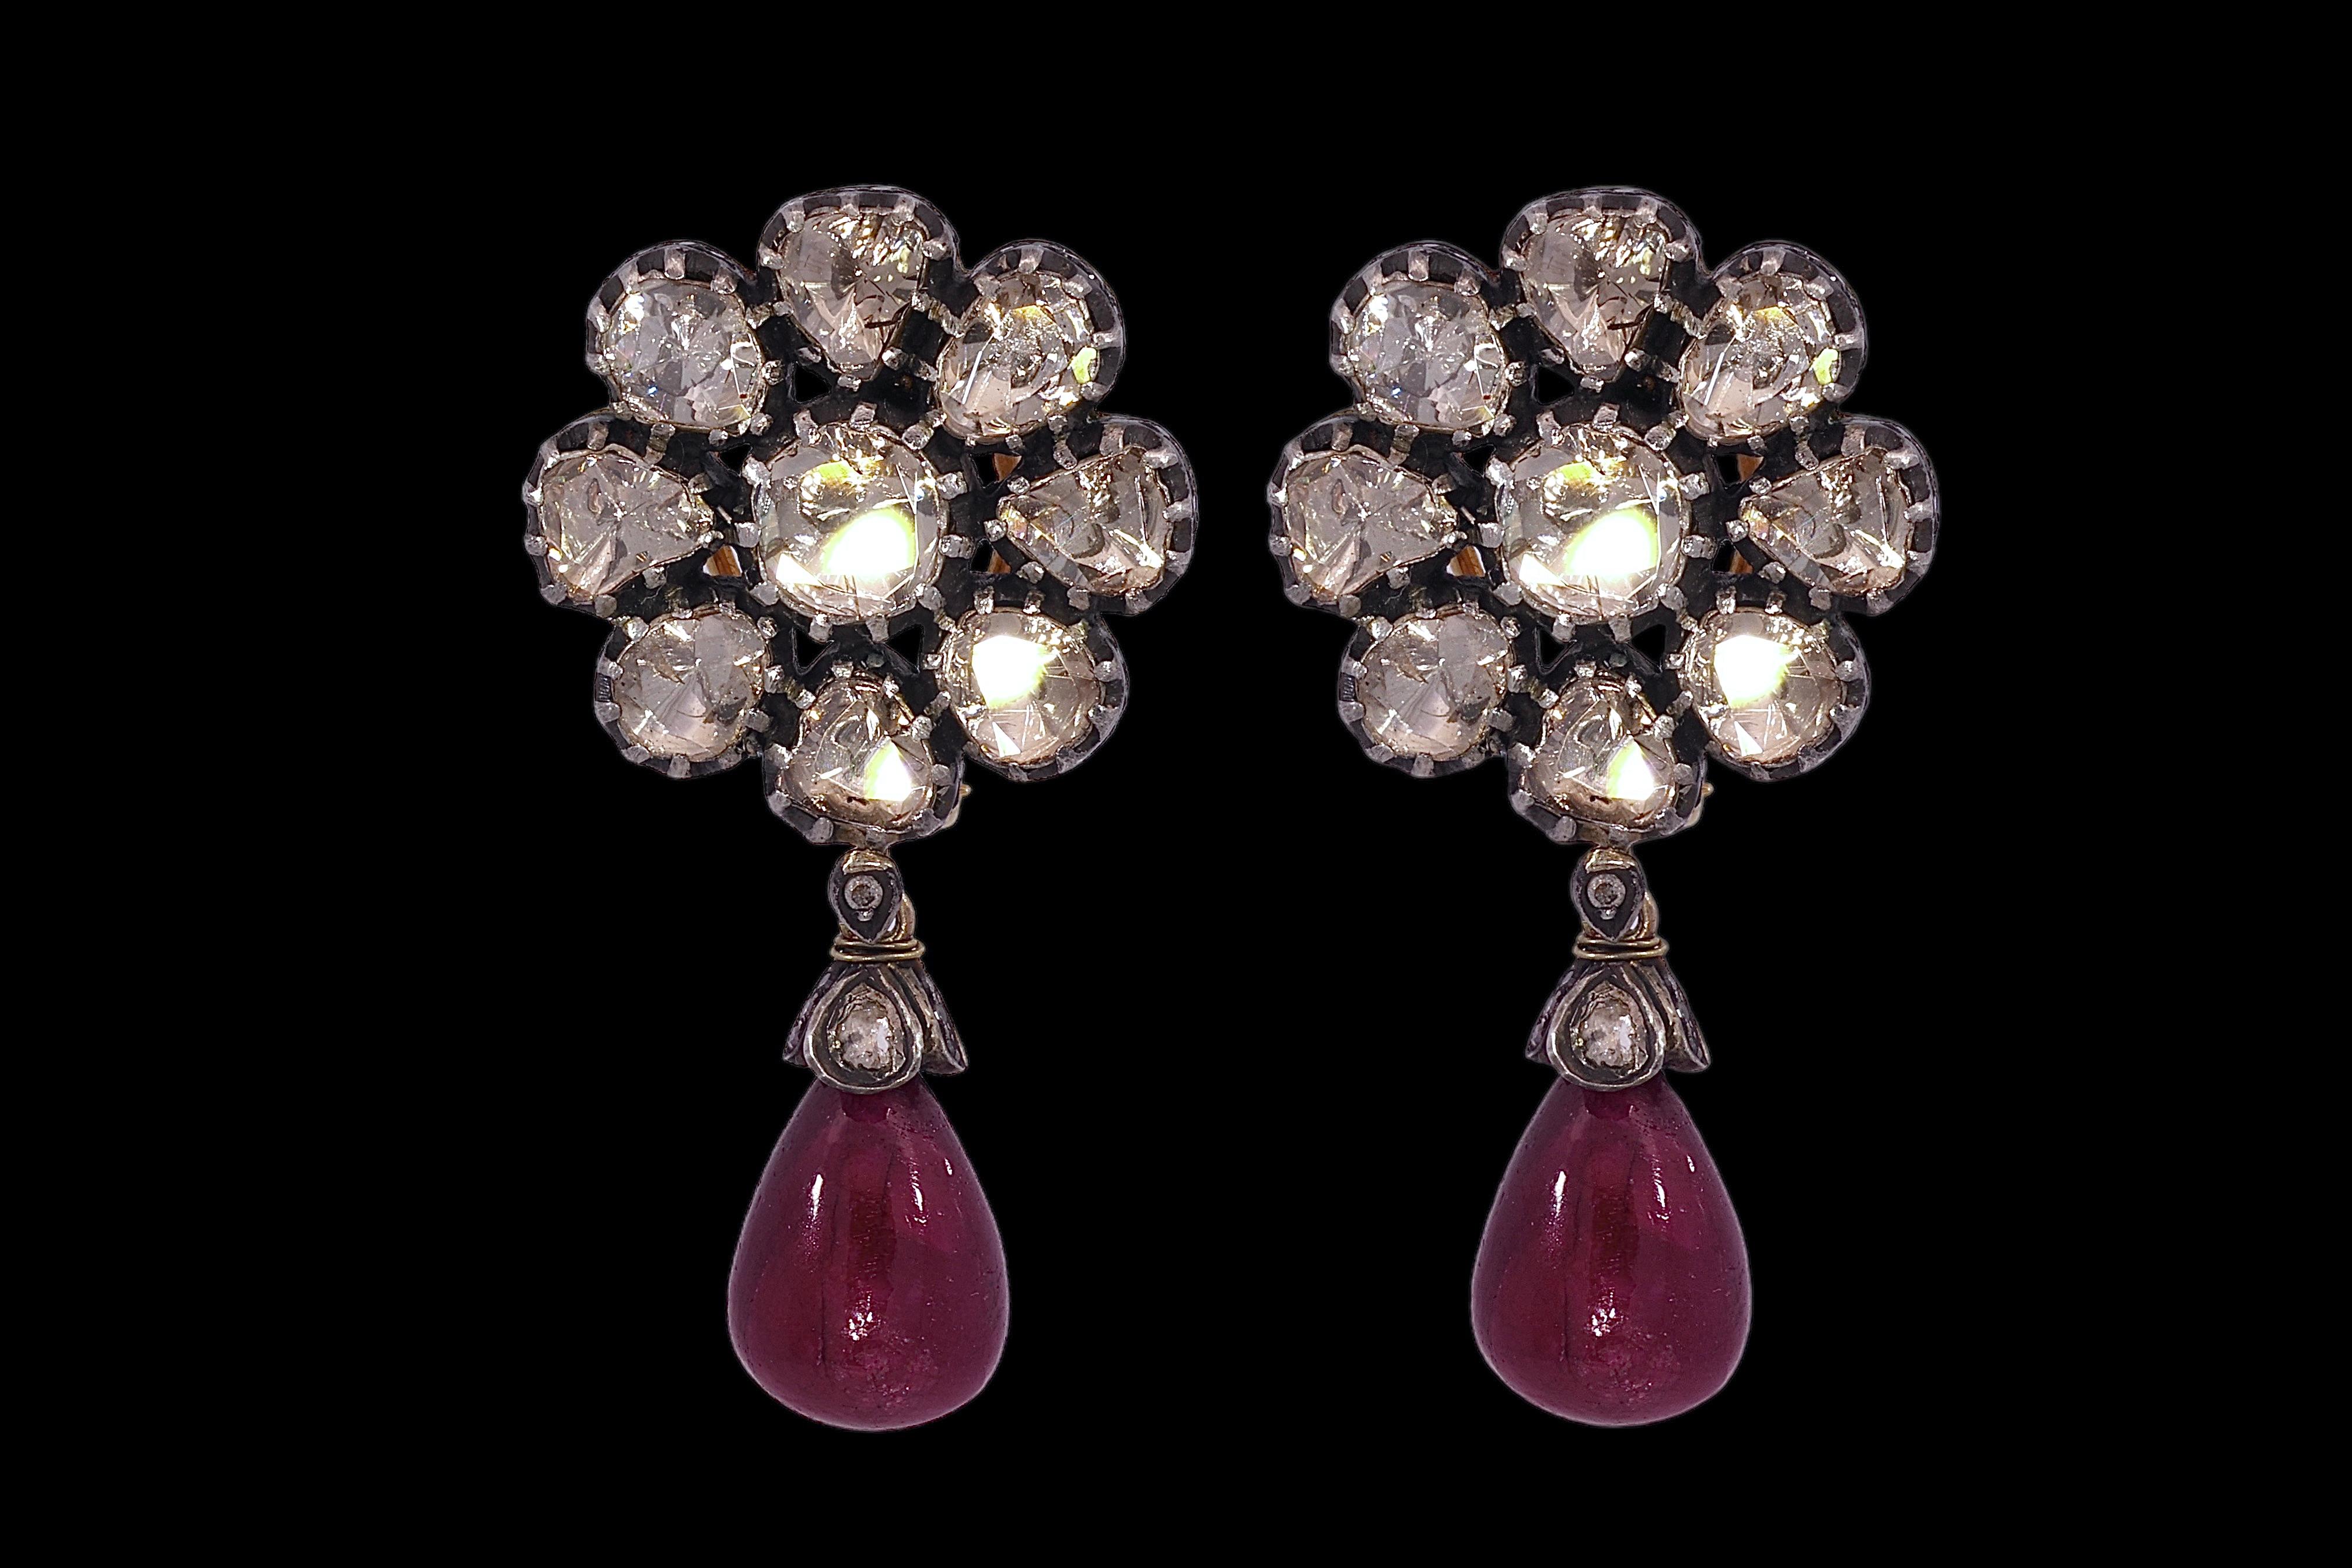 Gorgeous Silver on Gold Earrings With Rose Cut Diamonds in Flower Shape with Ruby Dangling Down 

Diamonds: Rose cut diamonds

Ruby: 2 pear shape rubies 

Material: Silver on gold

Measurements: 49.5 mm x 26.1 mm x 20.7 mm

Total weight: 30.1 gram /